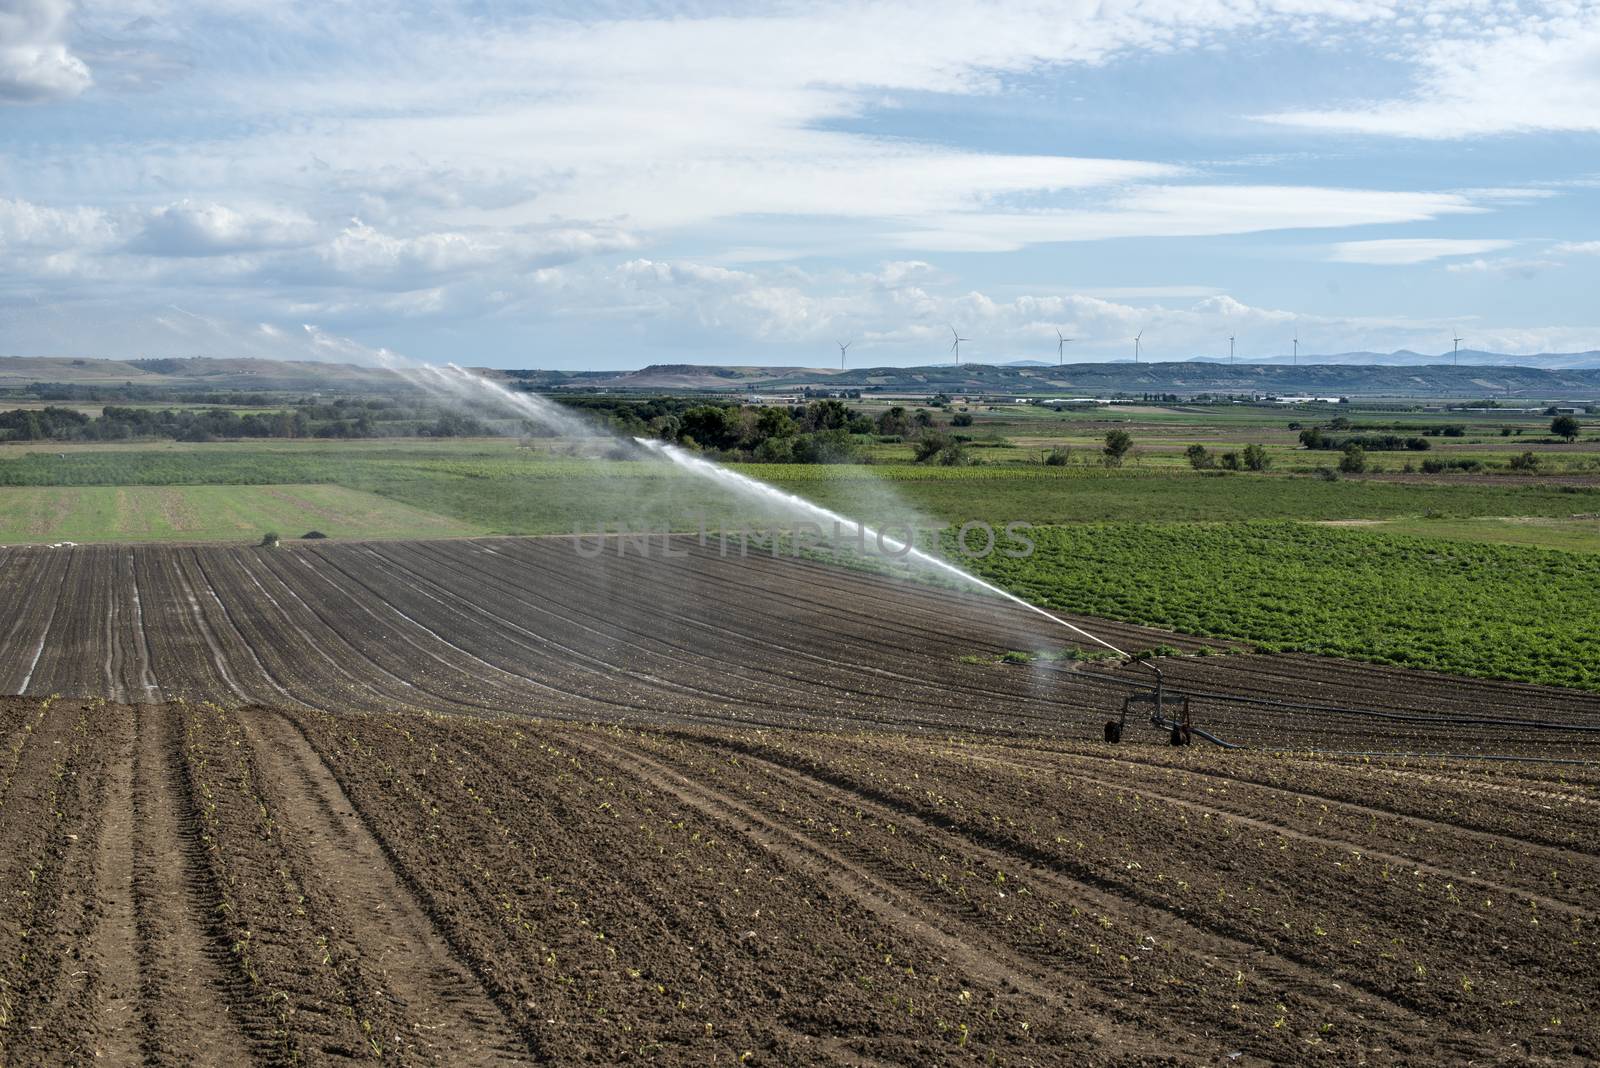 Watering green plants and plowed soil. Newly planted agriculture by deyan_georgiev